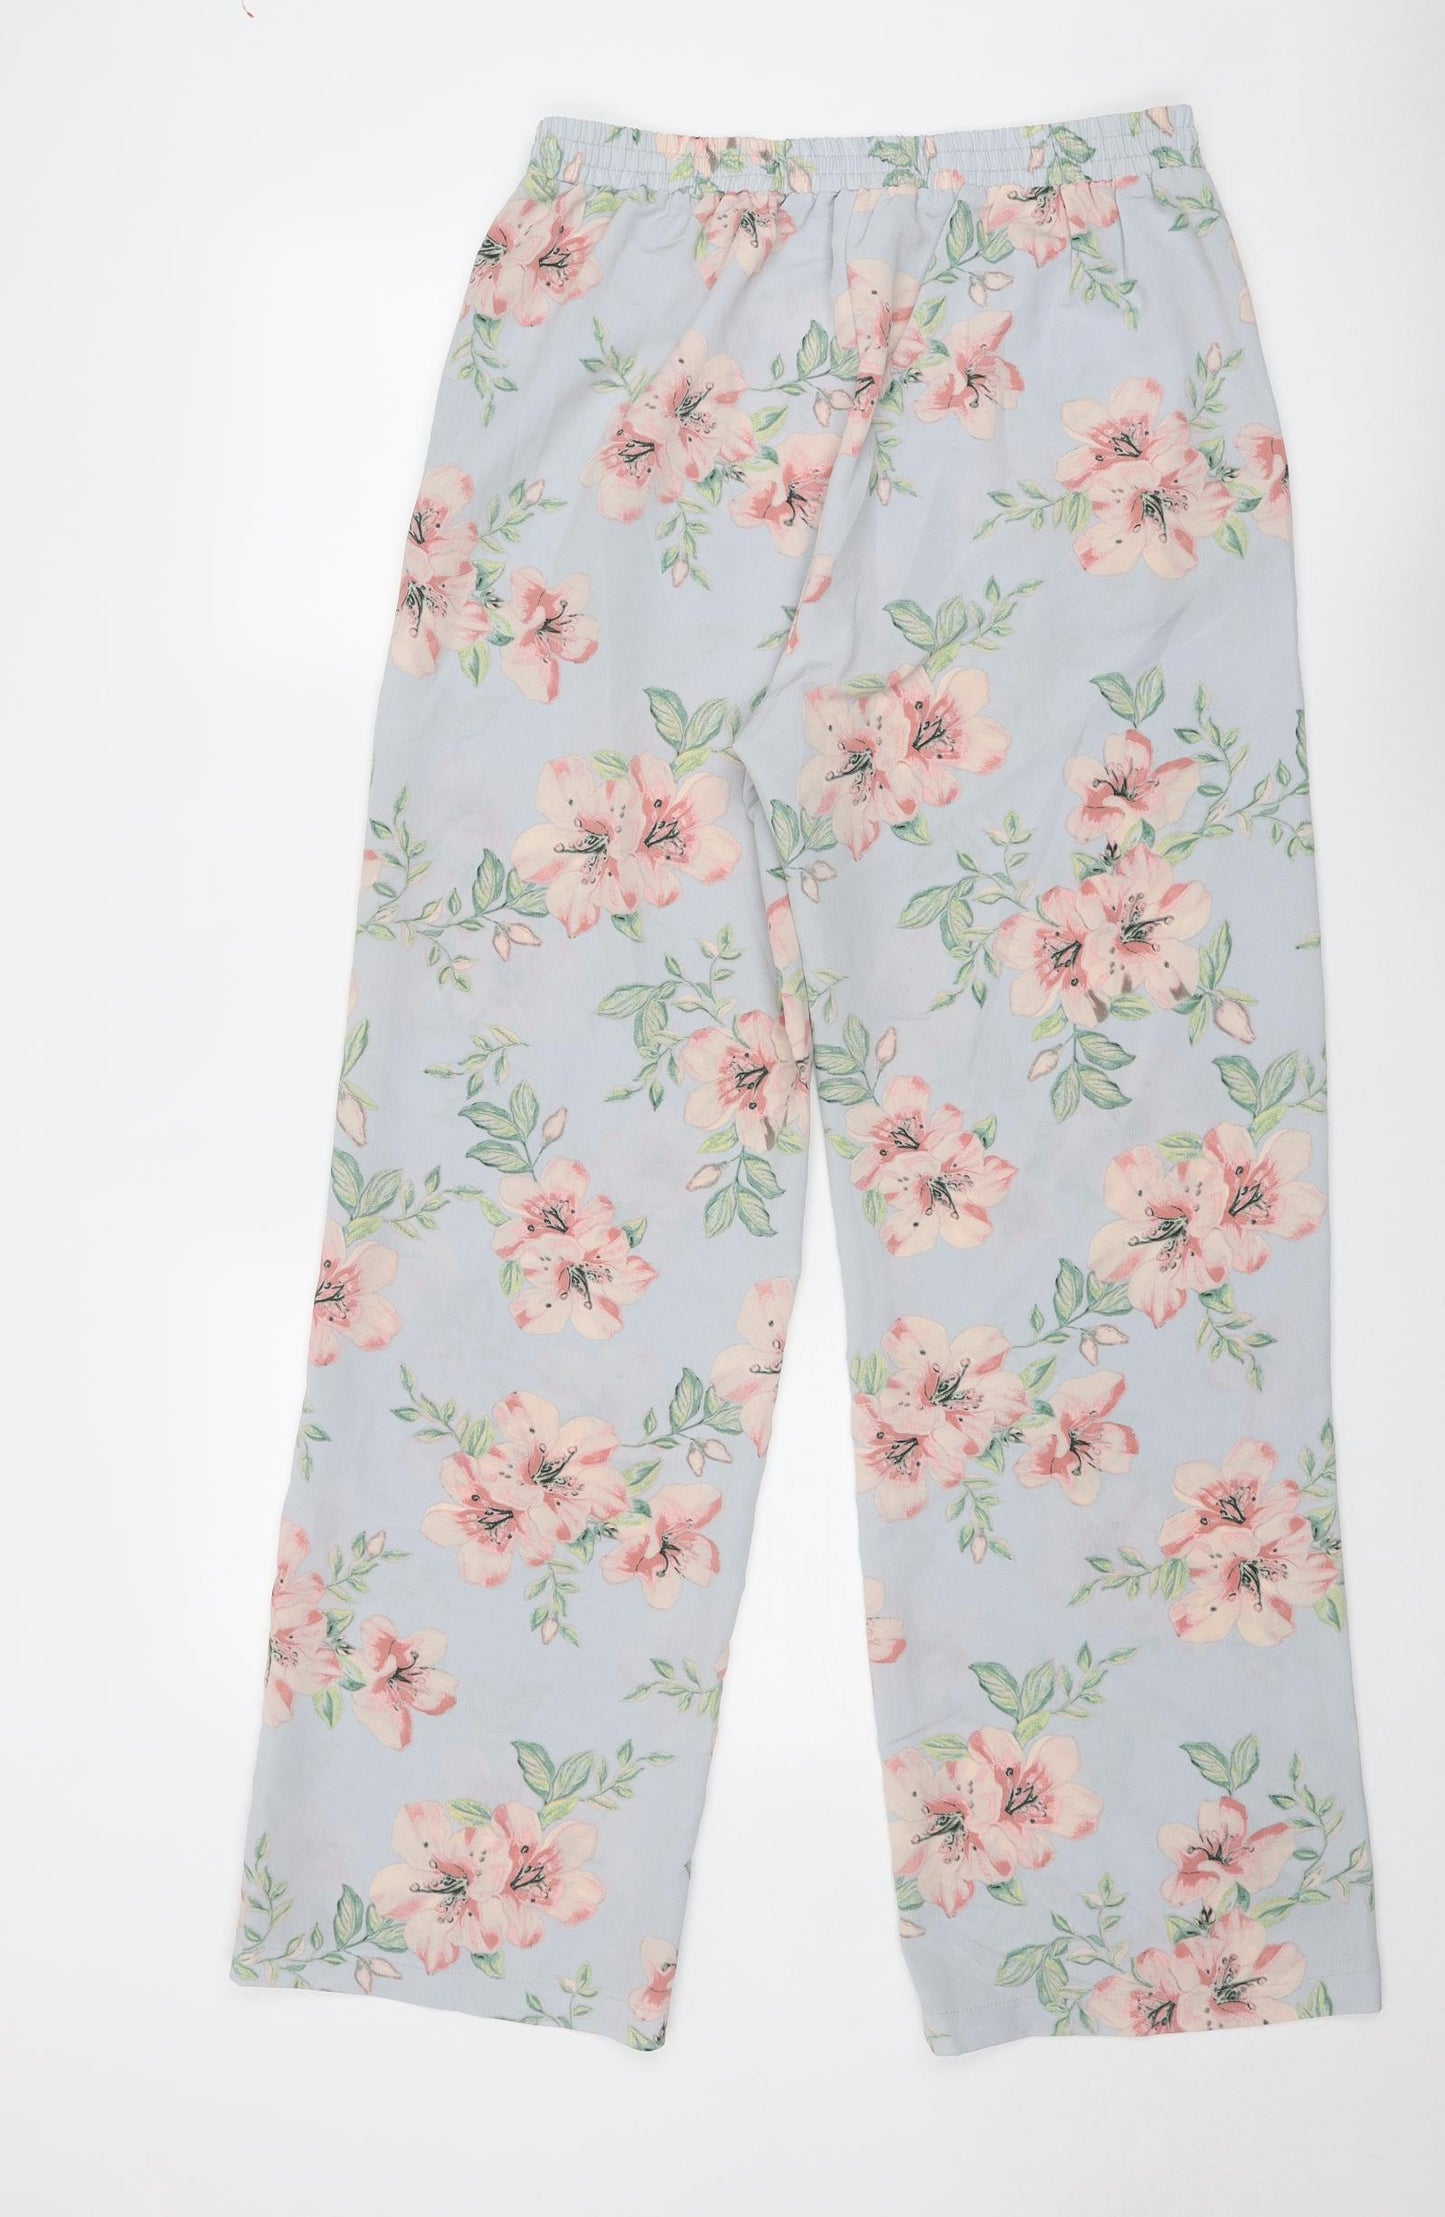 New Look Womens Grey Floral Polyester Trousers Size 12 Regular